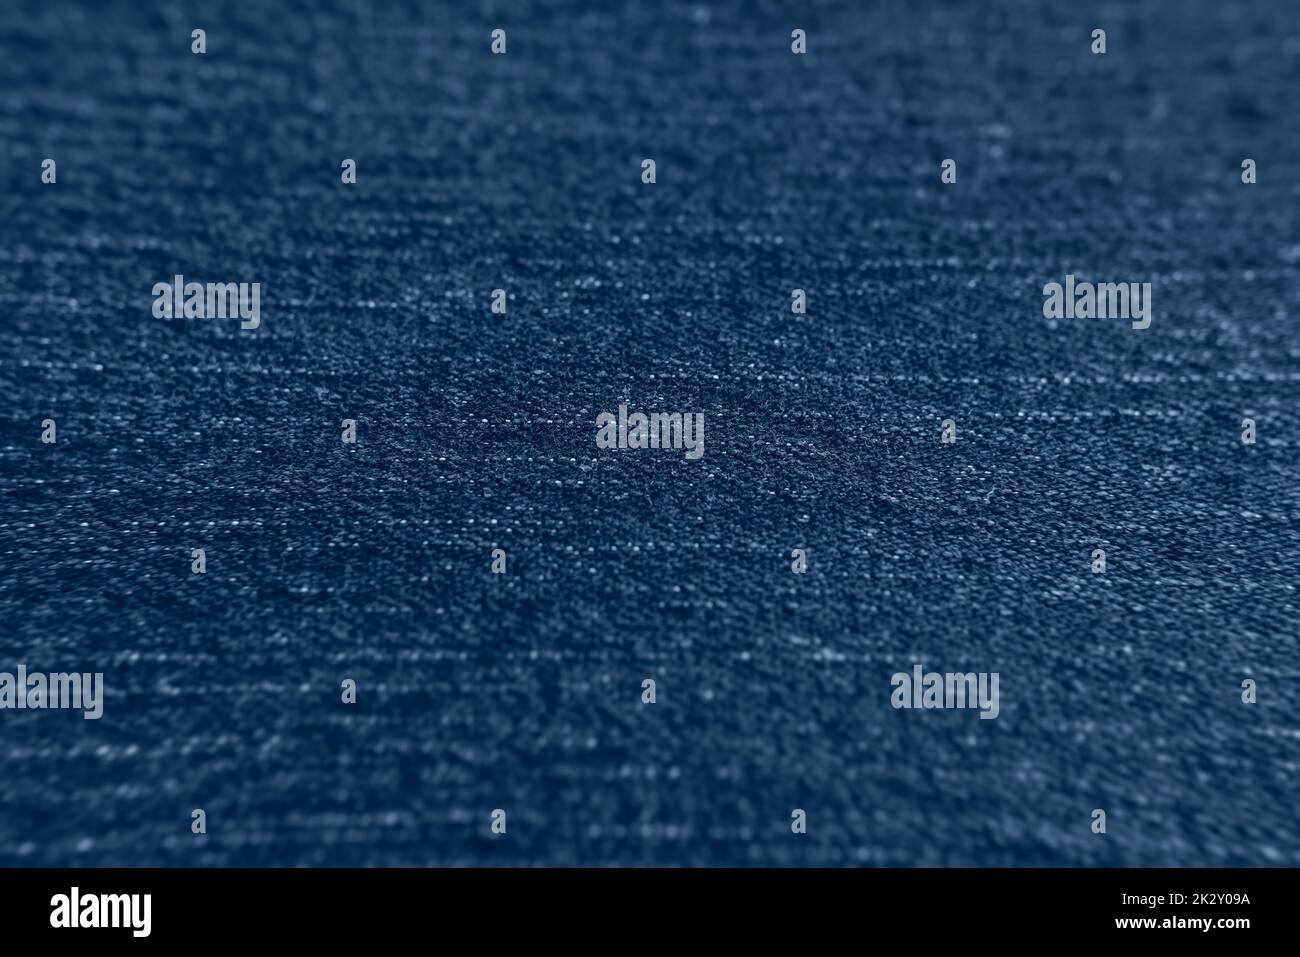 Denim texture. Blue jeans background, with selective focus. Stock Photo